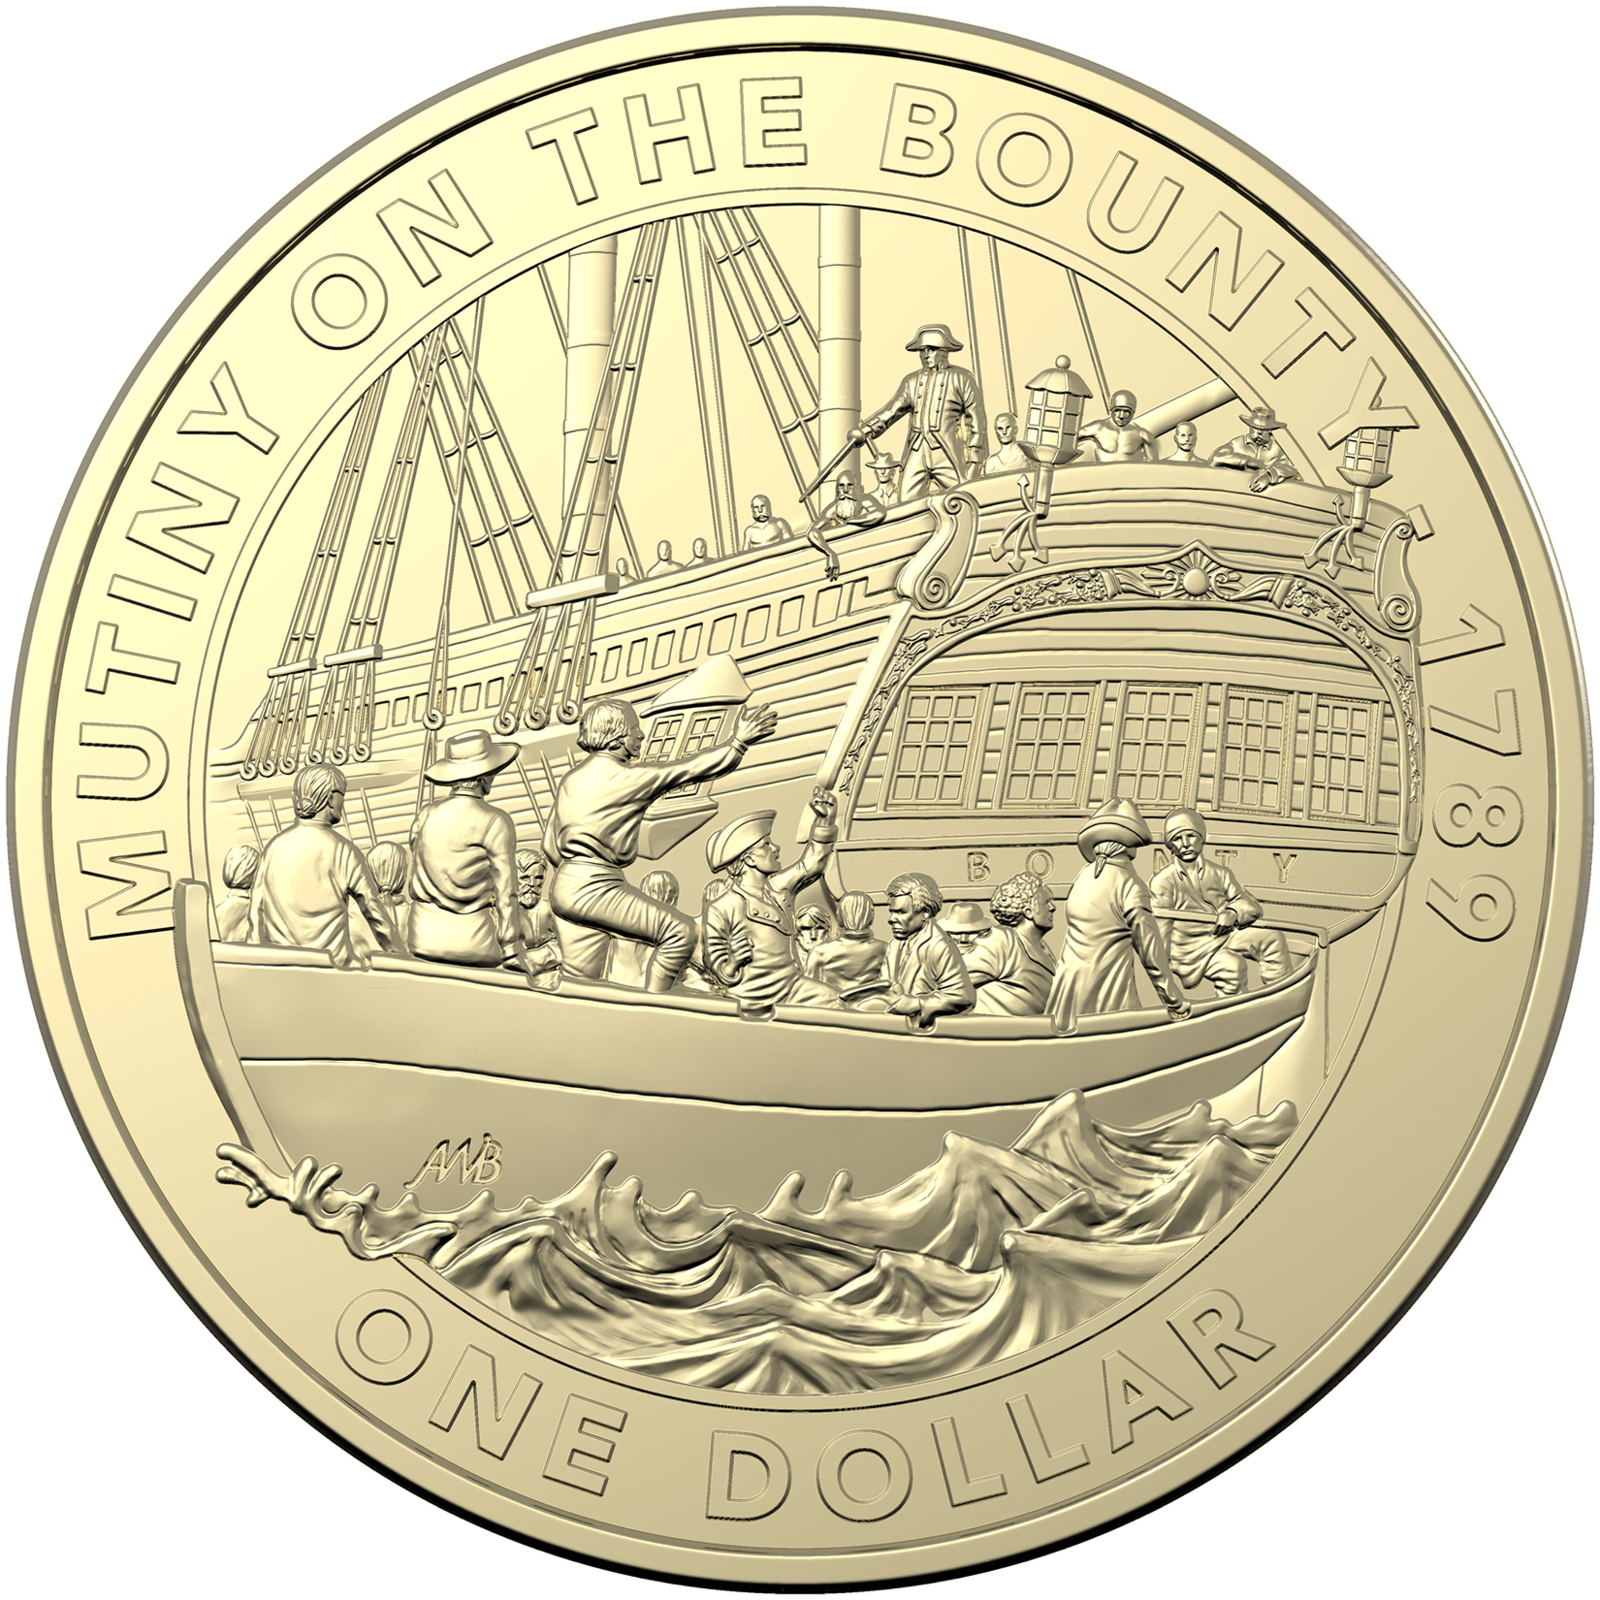 2019 $1 Mutiny and Rebellion – The Bounty 1789 Uncirculated Coin